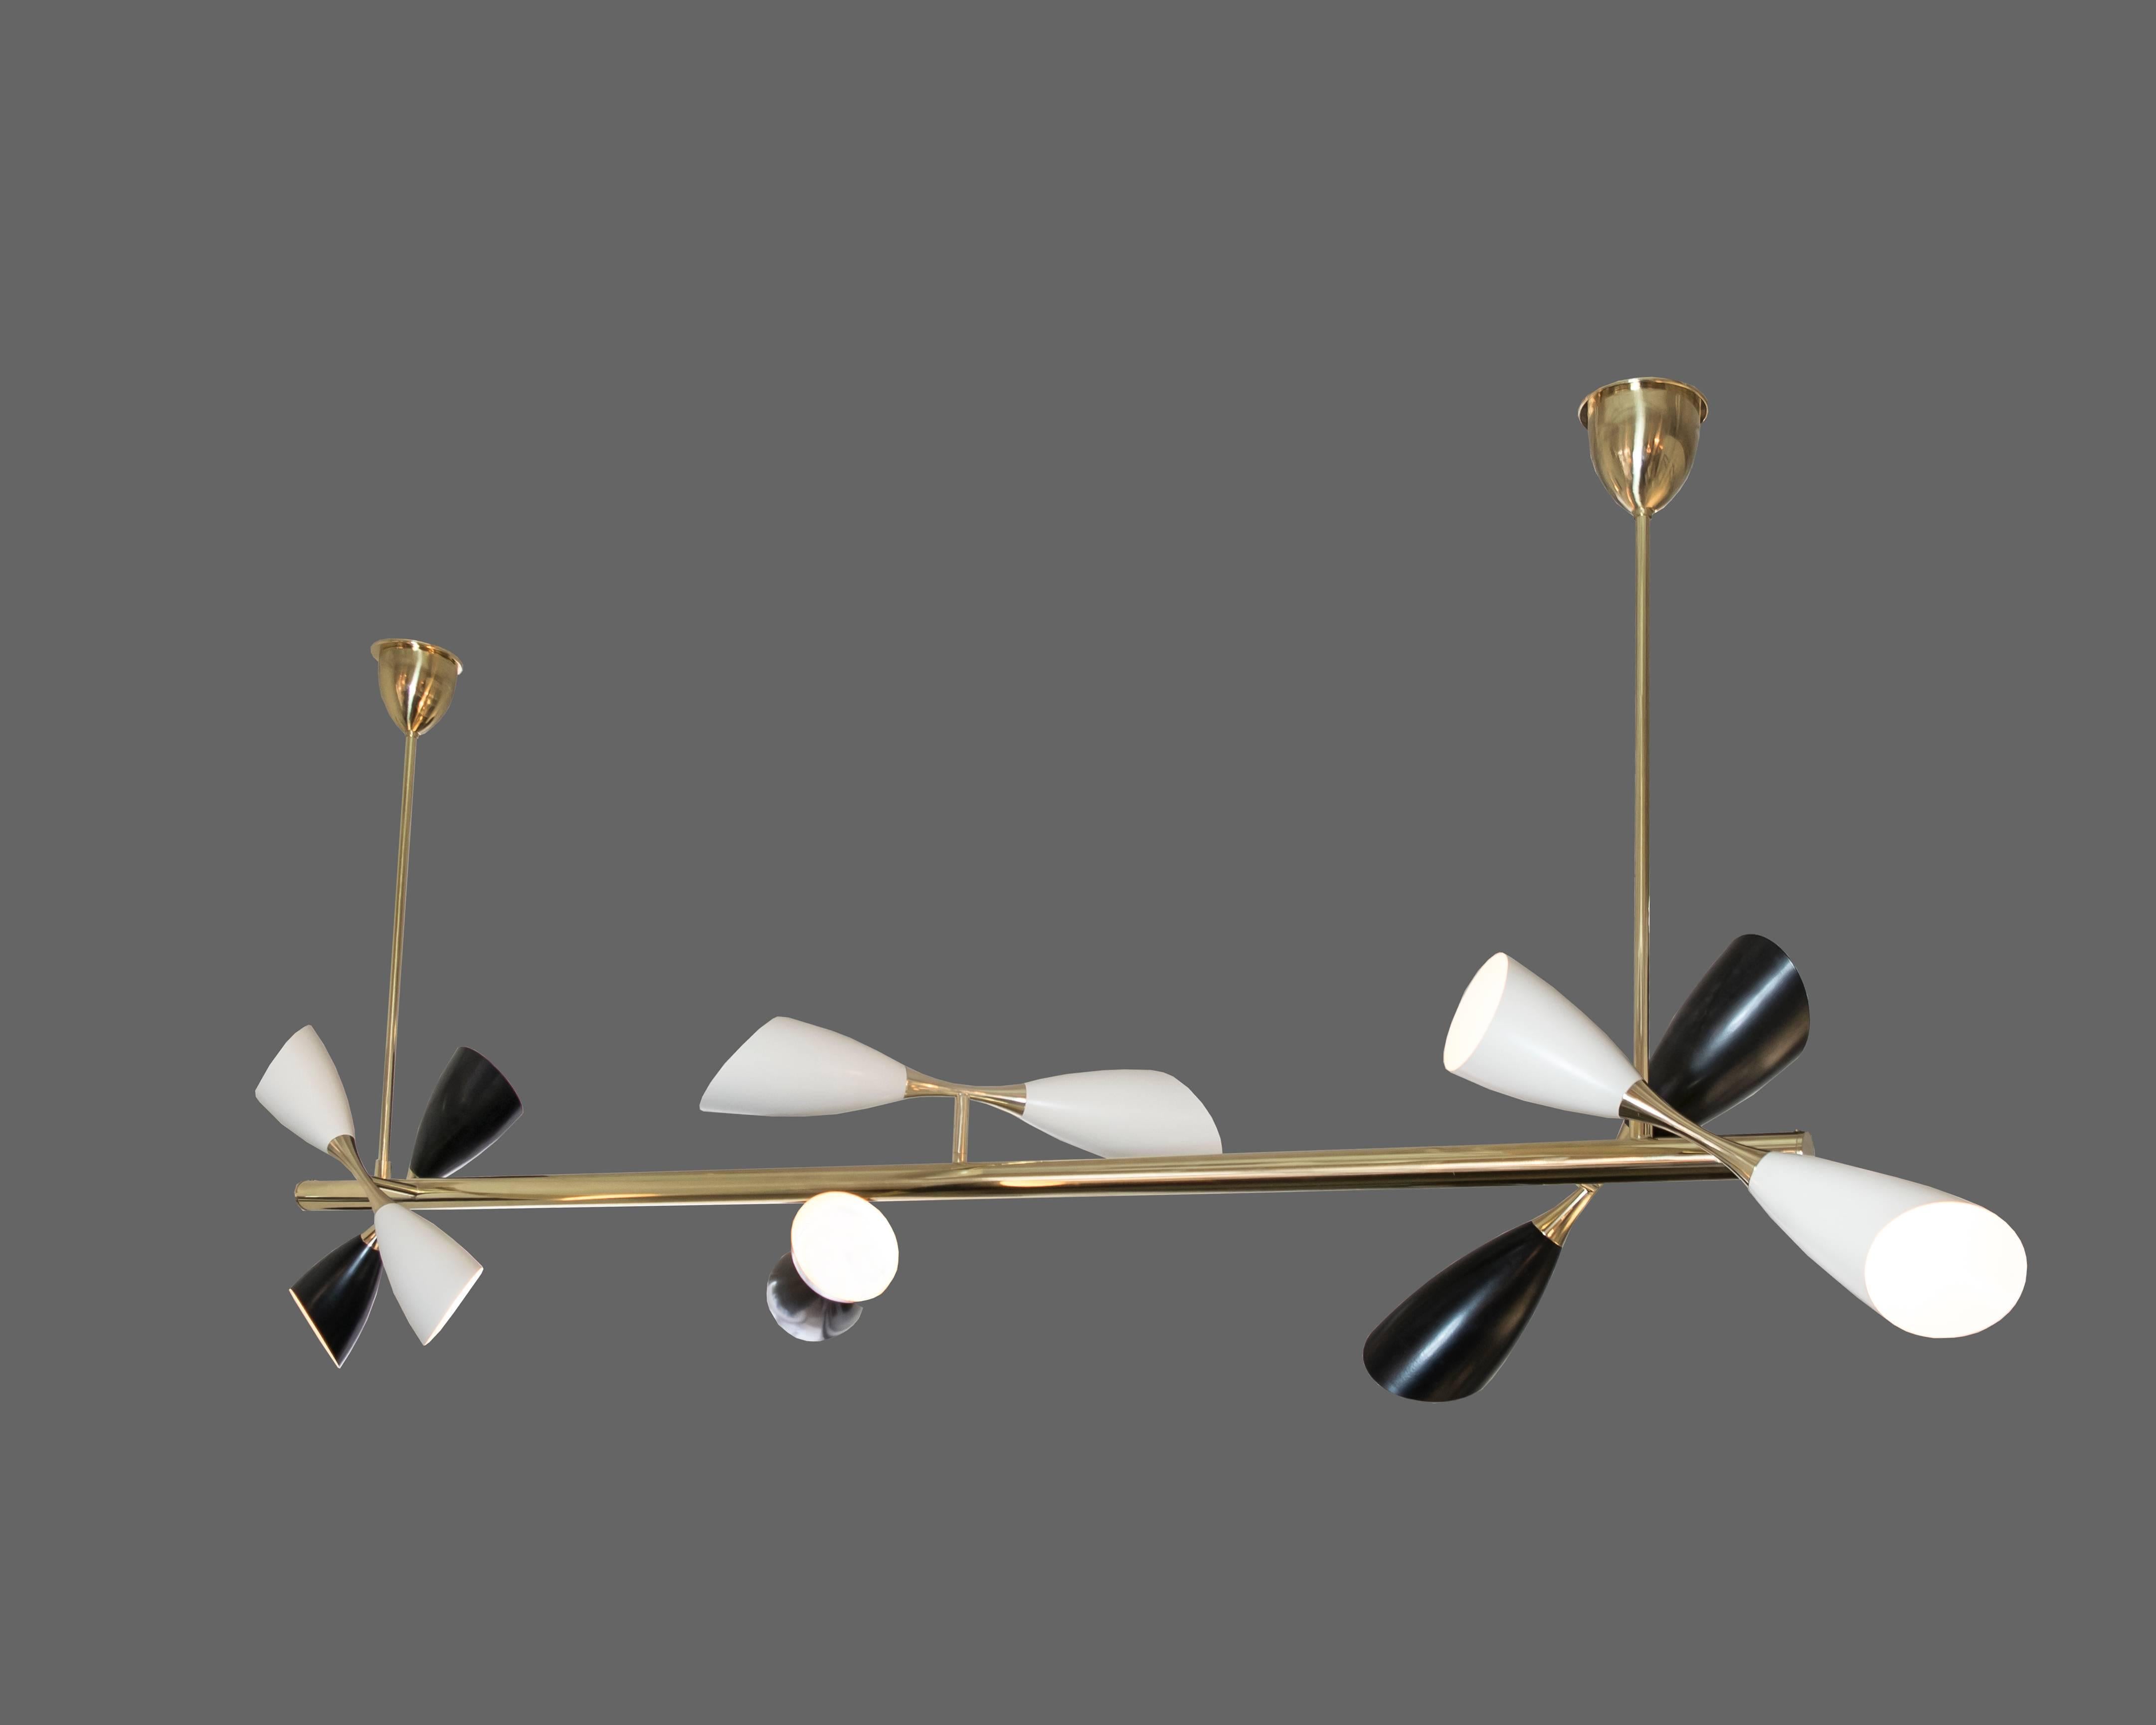 Extremely rare Stilnovo design seven foot long centre post chandelier with six double sided cone lights, three white, three black. This light would look absolutely fantastic over a long dining table.